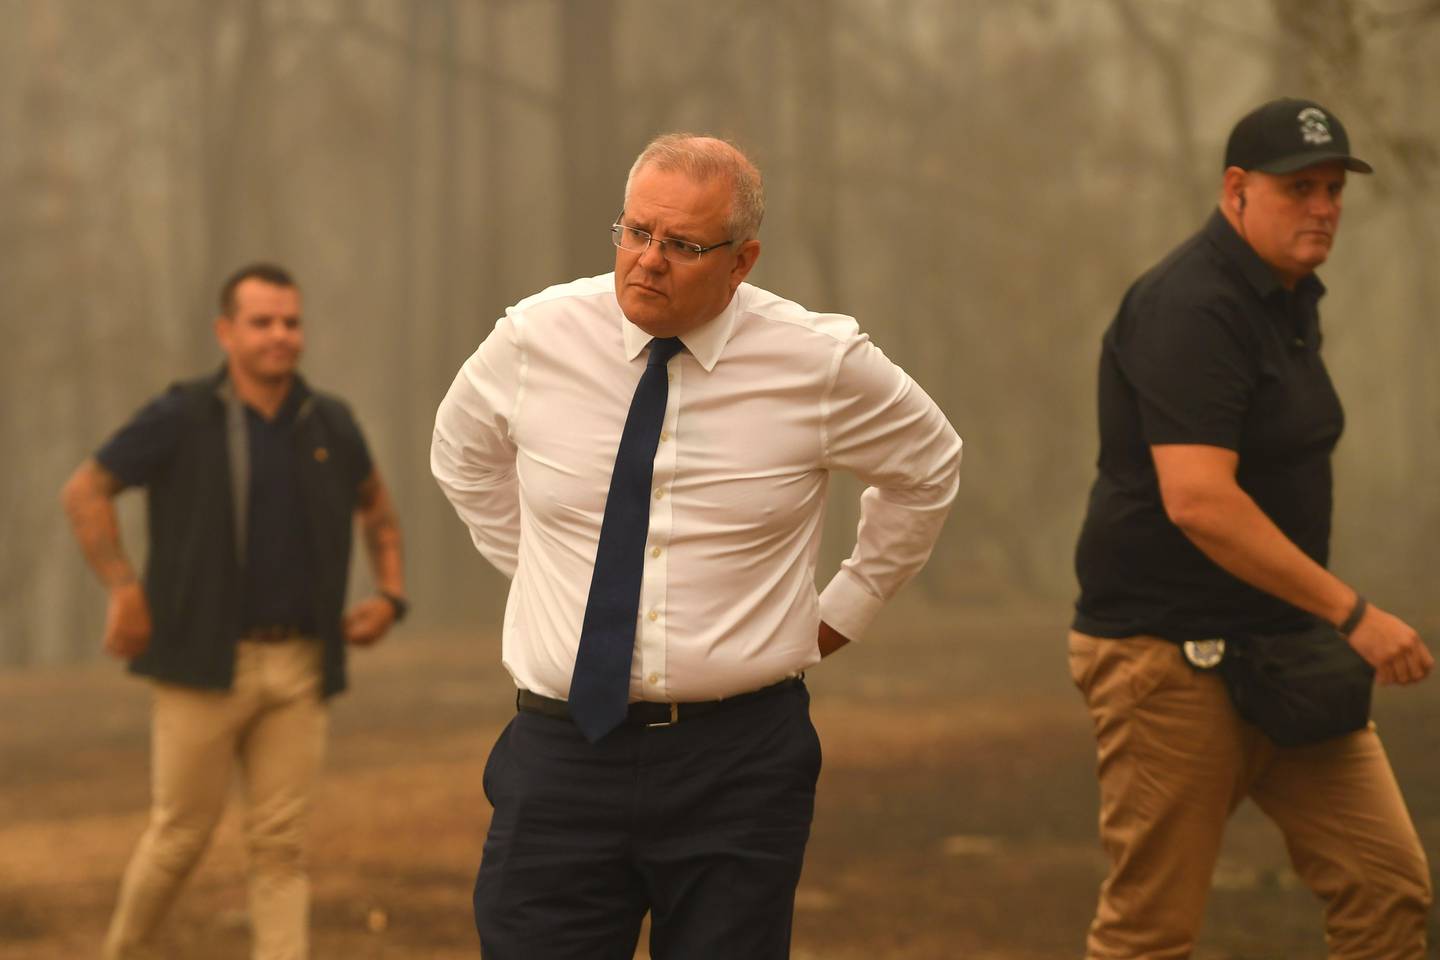 Australia's Prime Minister Scott Morrison (C) visits a resident's property in an area devastated by bushfires in Sarsfield, Victoria state on January 3, 2020. - Australia ordered residents and tourists out of the path of raging bushfires on January 3 as the country braced for a weekend heatwave expected to fan the deadly inferno. (Photo by James ROSS / POOL / AFP)